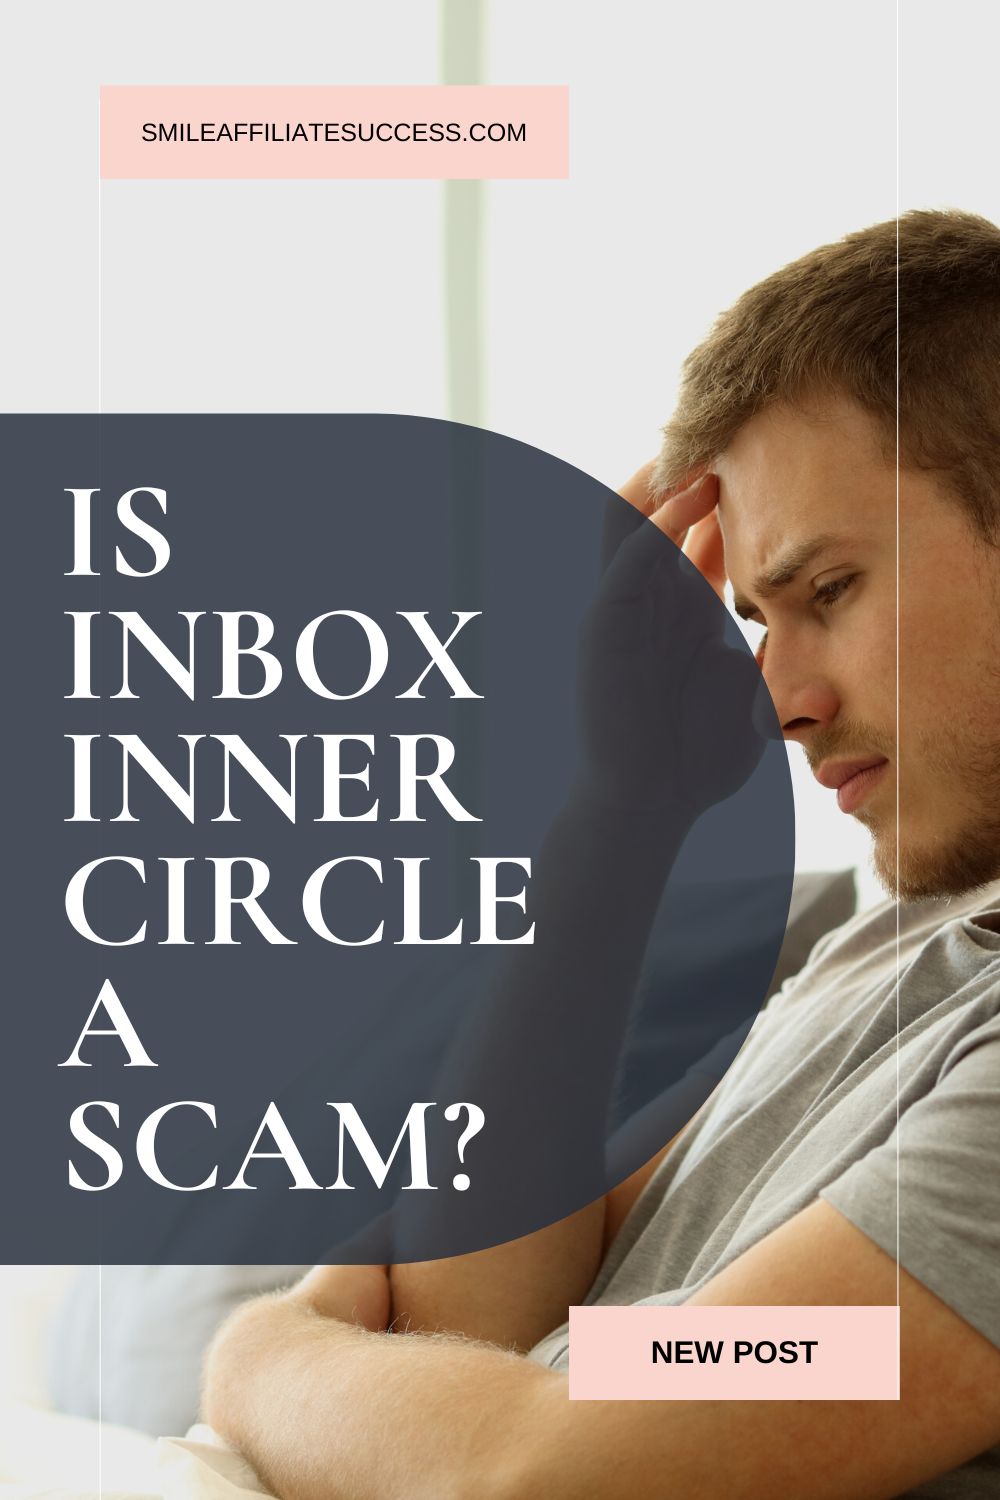 What Is Inbox Inner Circle?